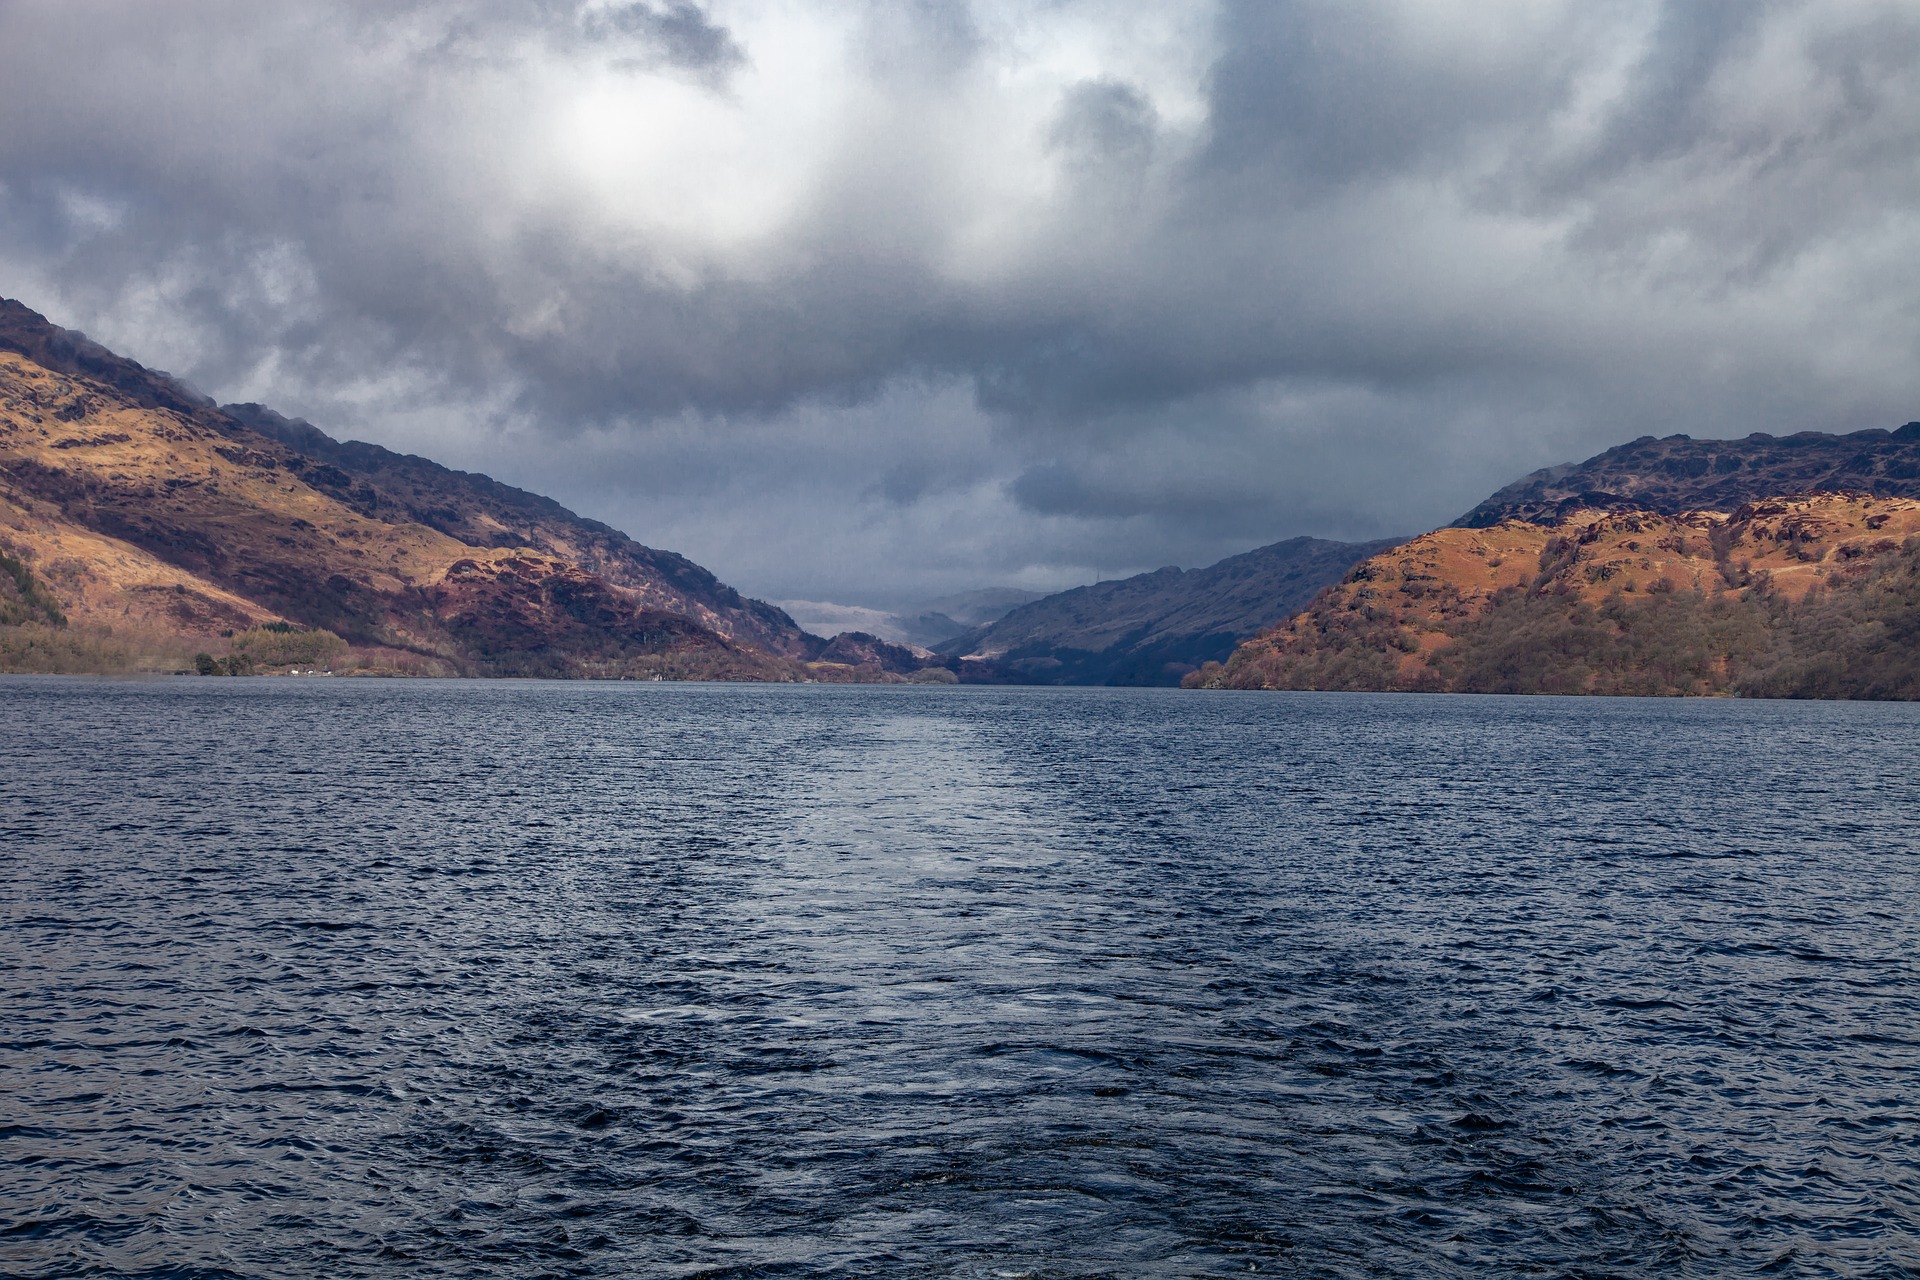 Three rescued from Loch Lomond after boat capsizes